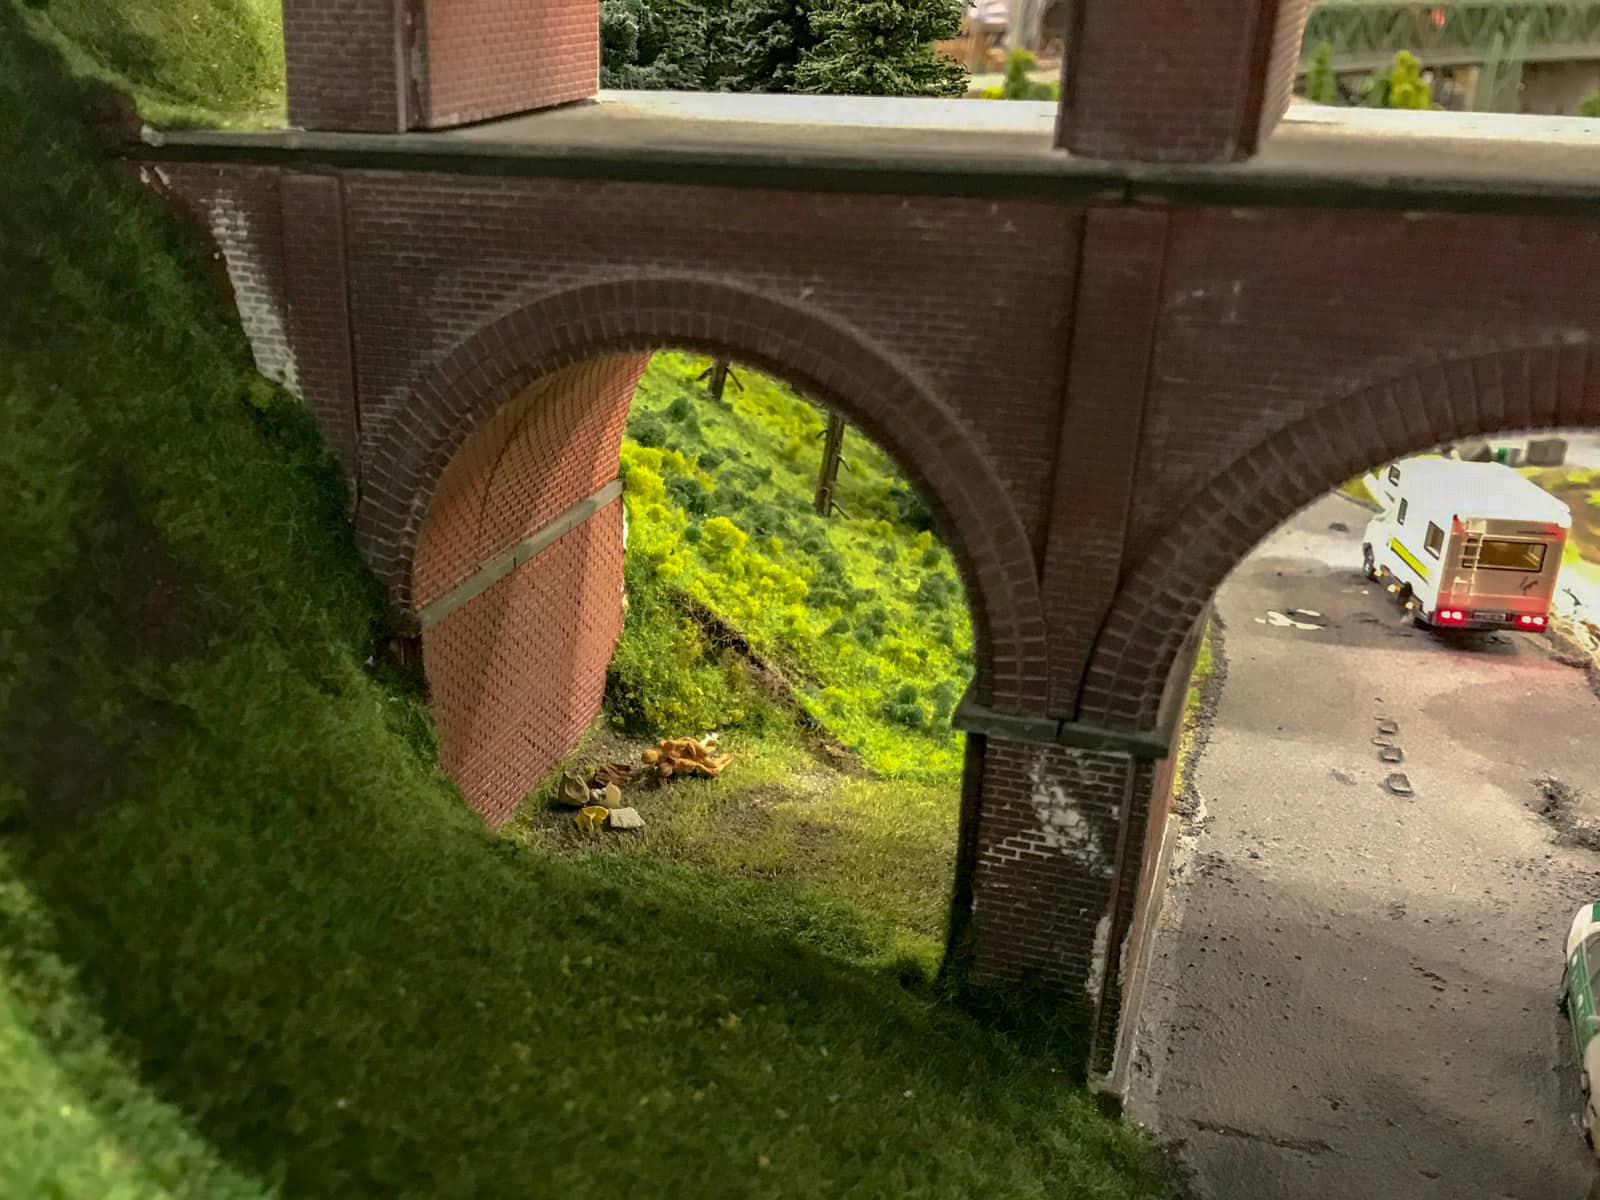 Miniature figurines romping in the grass, under the arches of a bridge